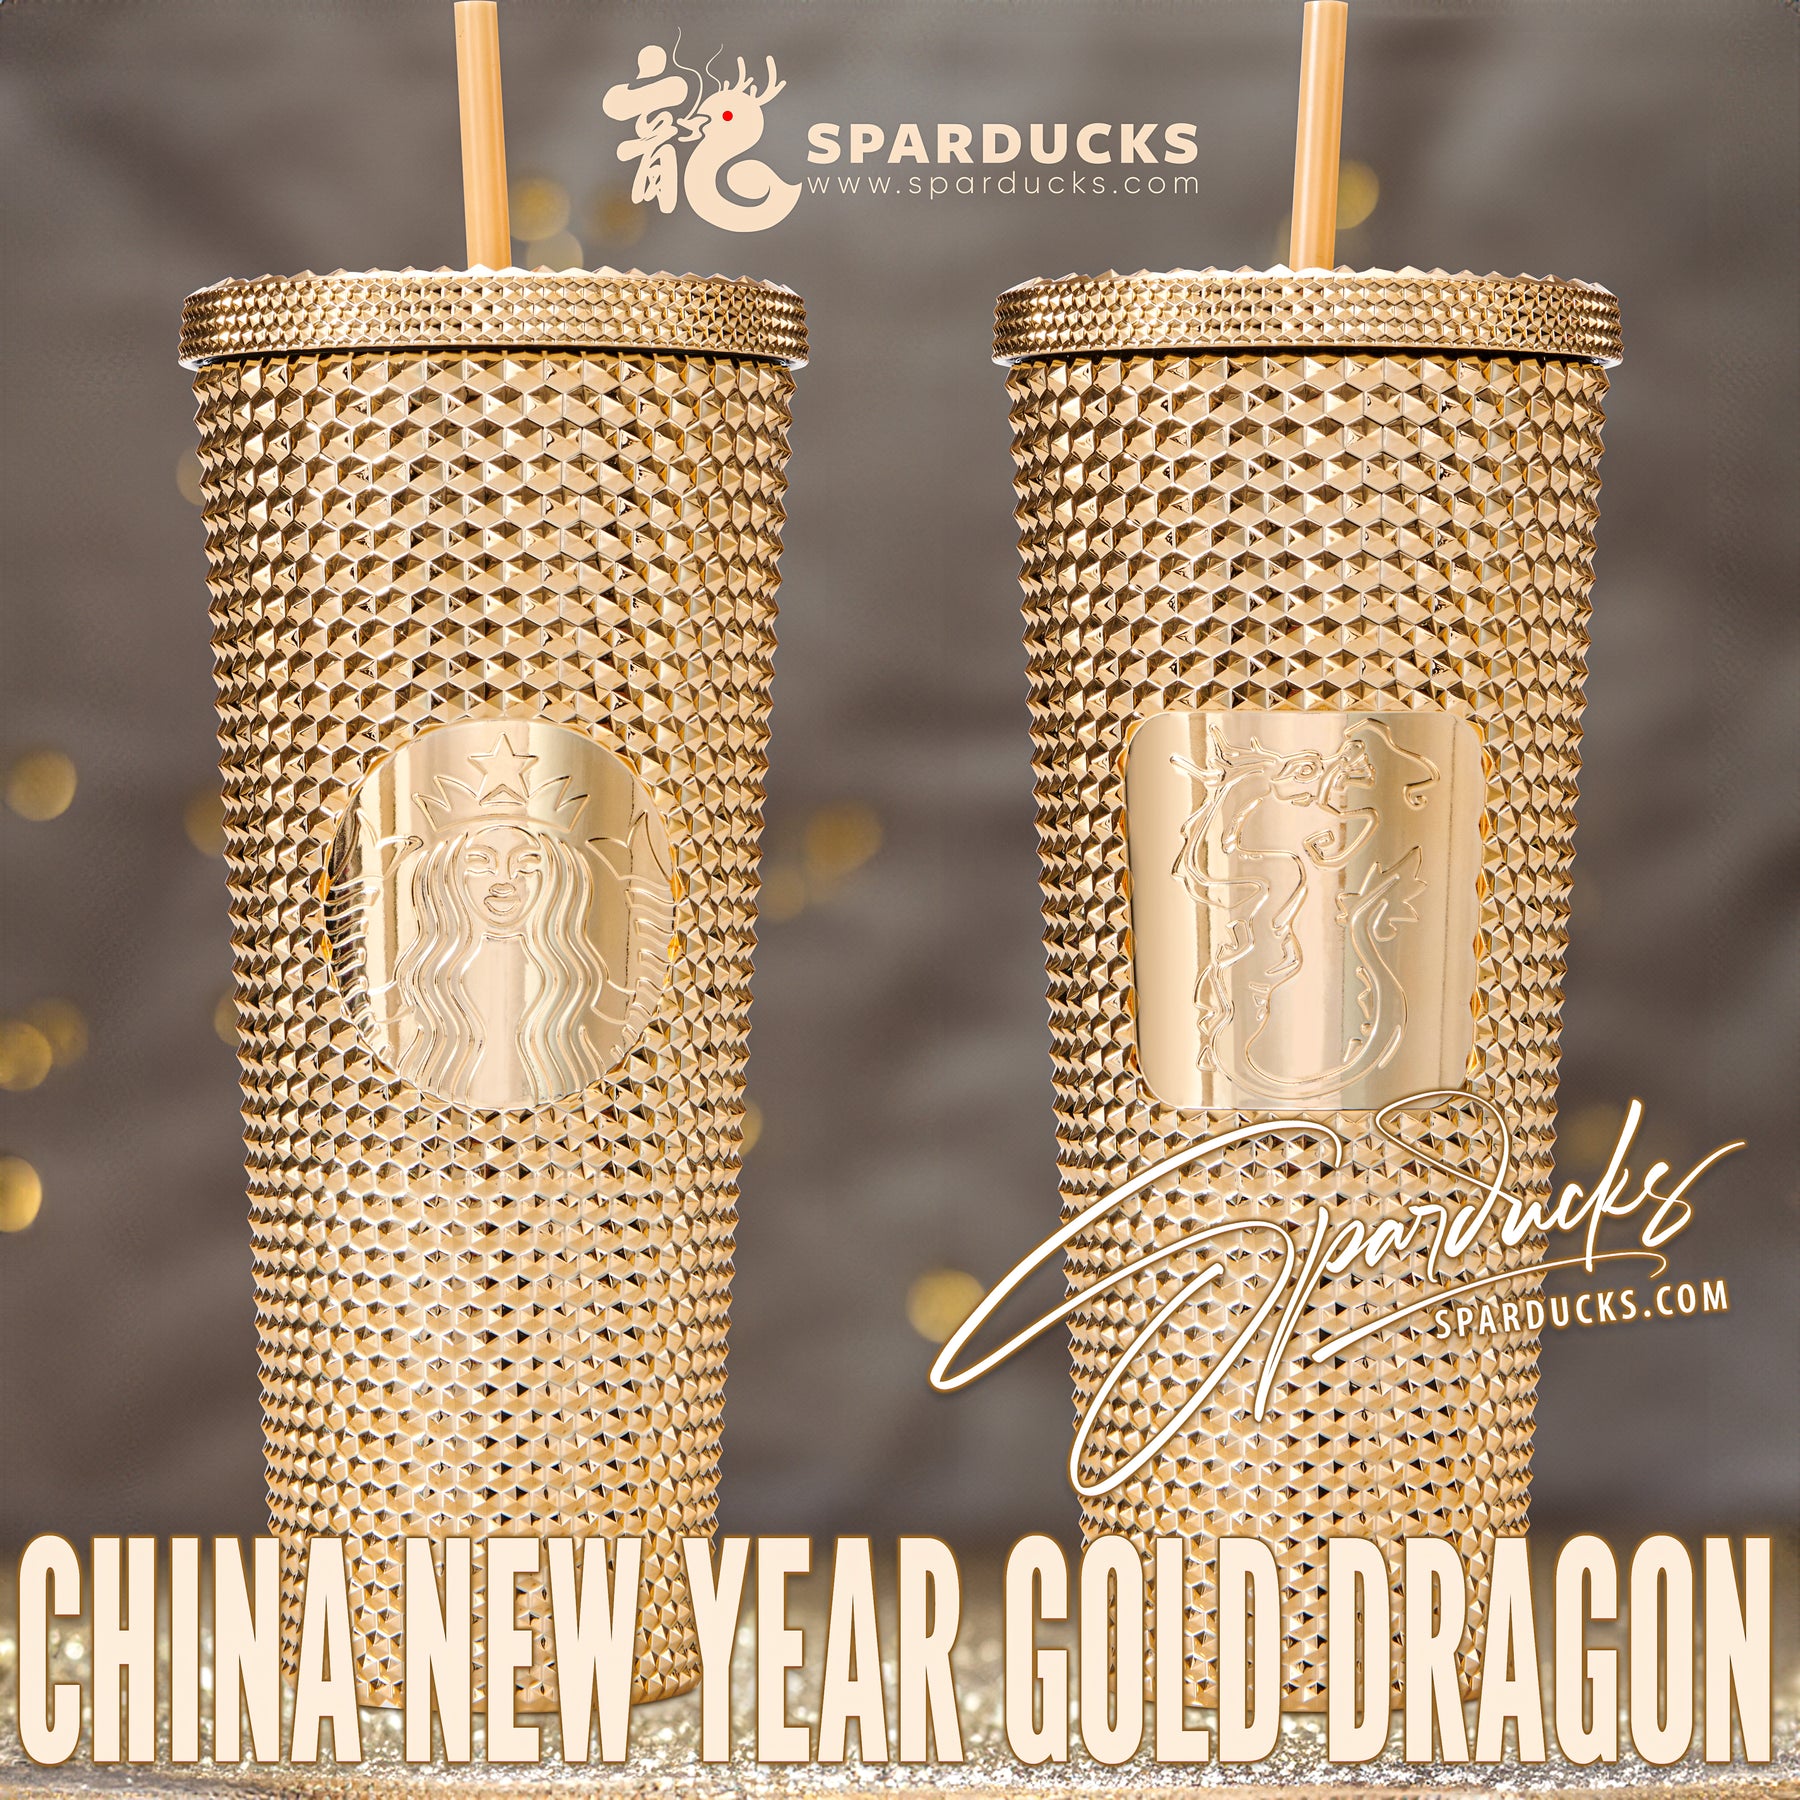 24oz China Year of the Dragon Chrome Gold Studded Cup